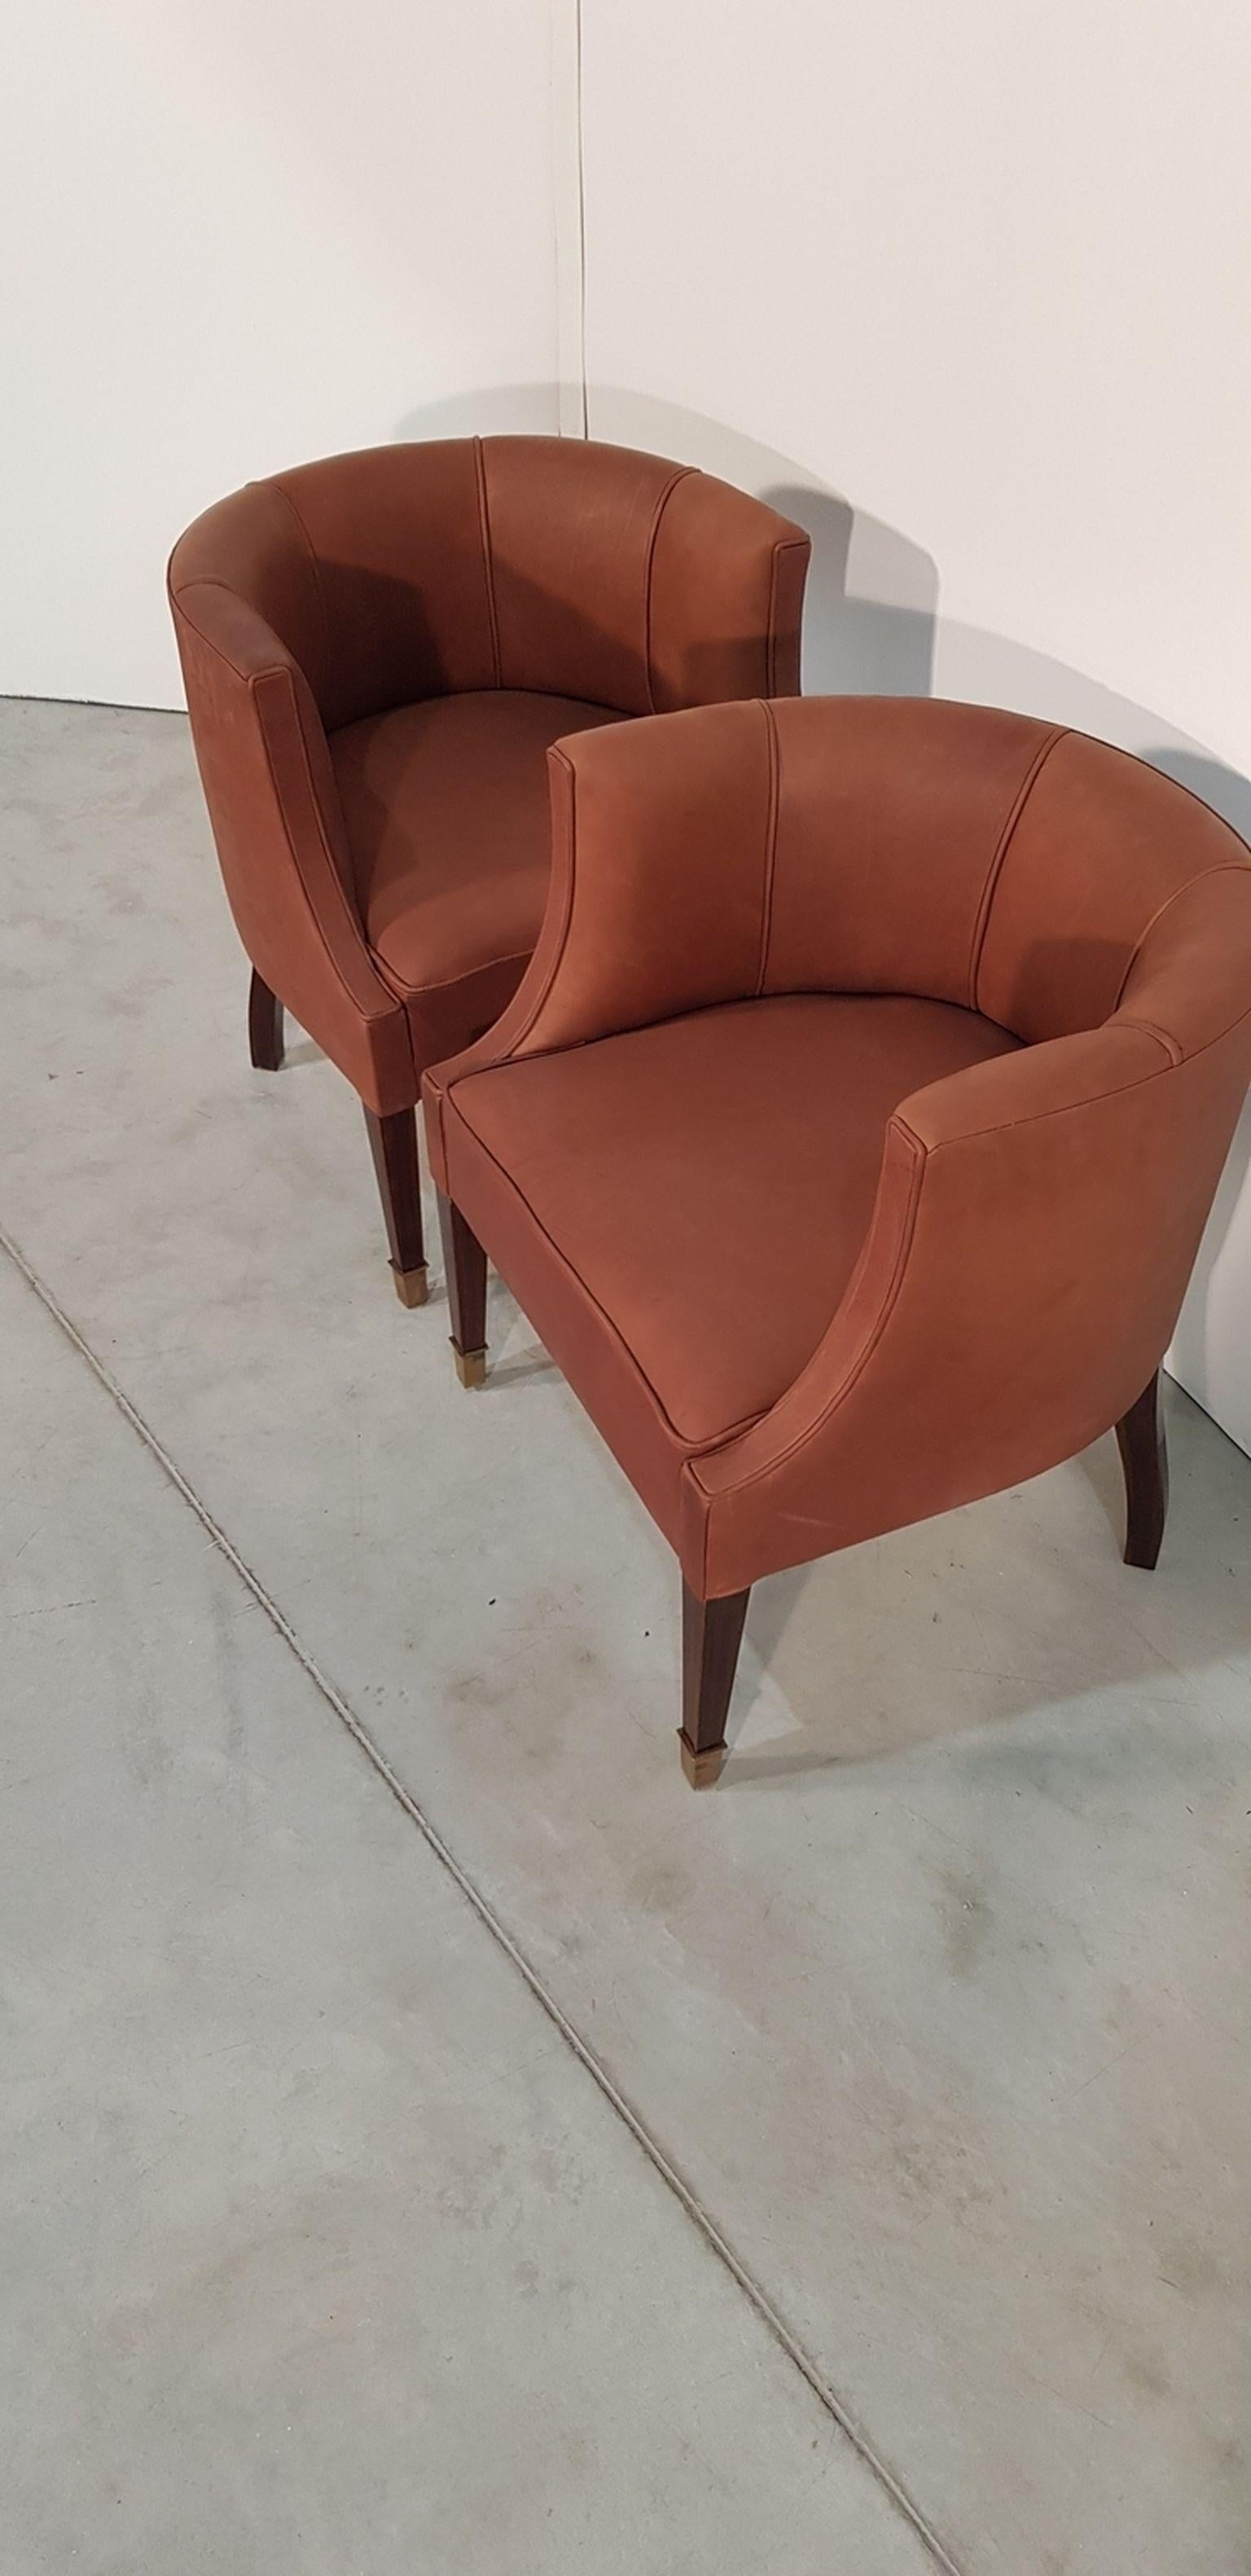 Pair of Art Deco Armchairs on Walnut Legs Covered Brown Leather, Hungary, 1930s (Art déco) im Angebot